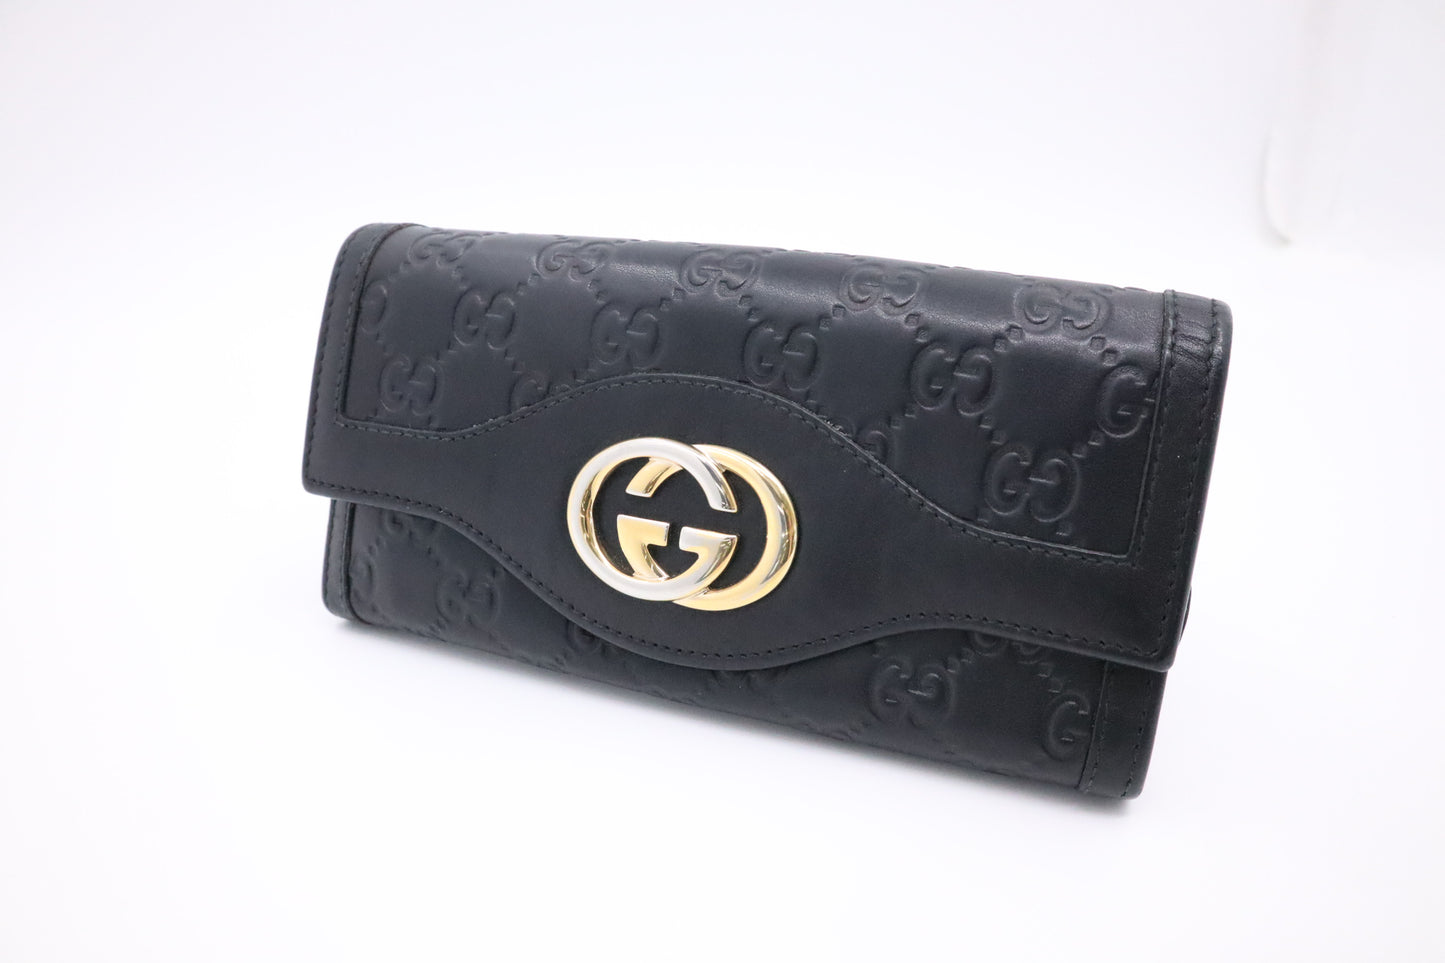 Gucci Continental Wallet in Black Guccissima Leather